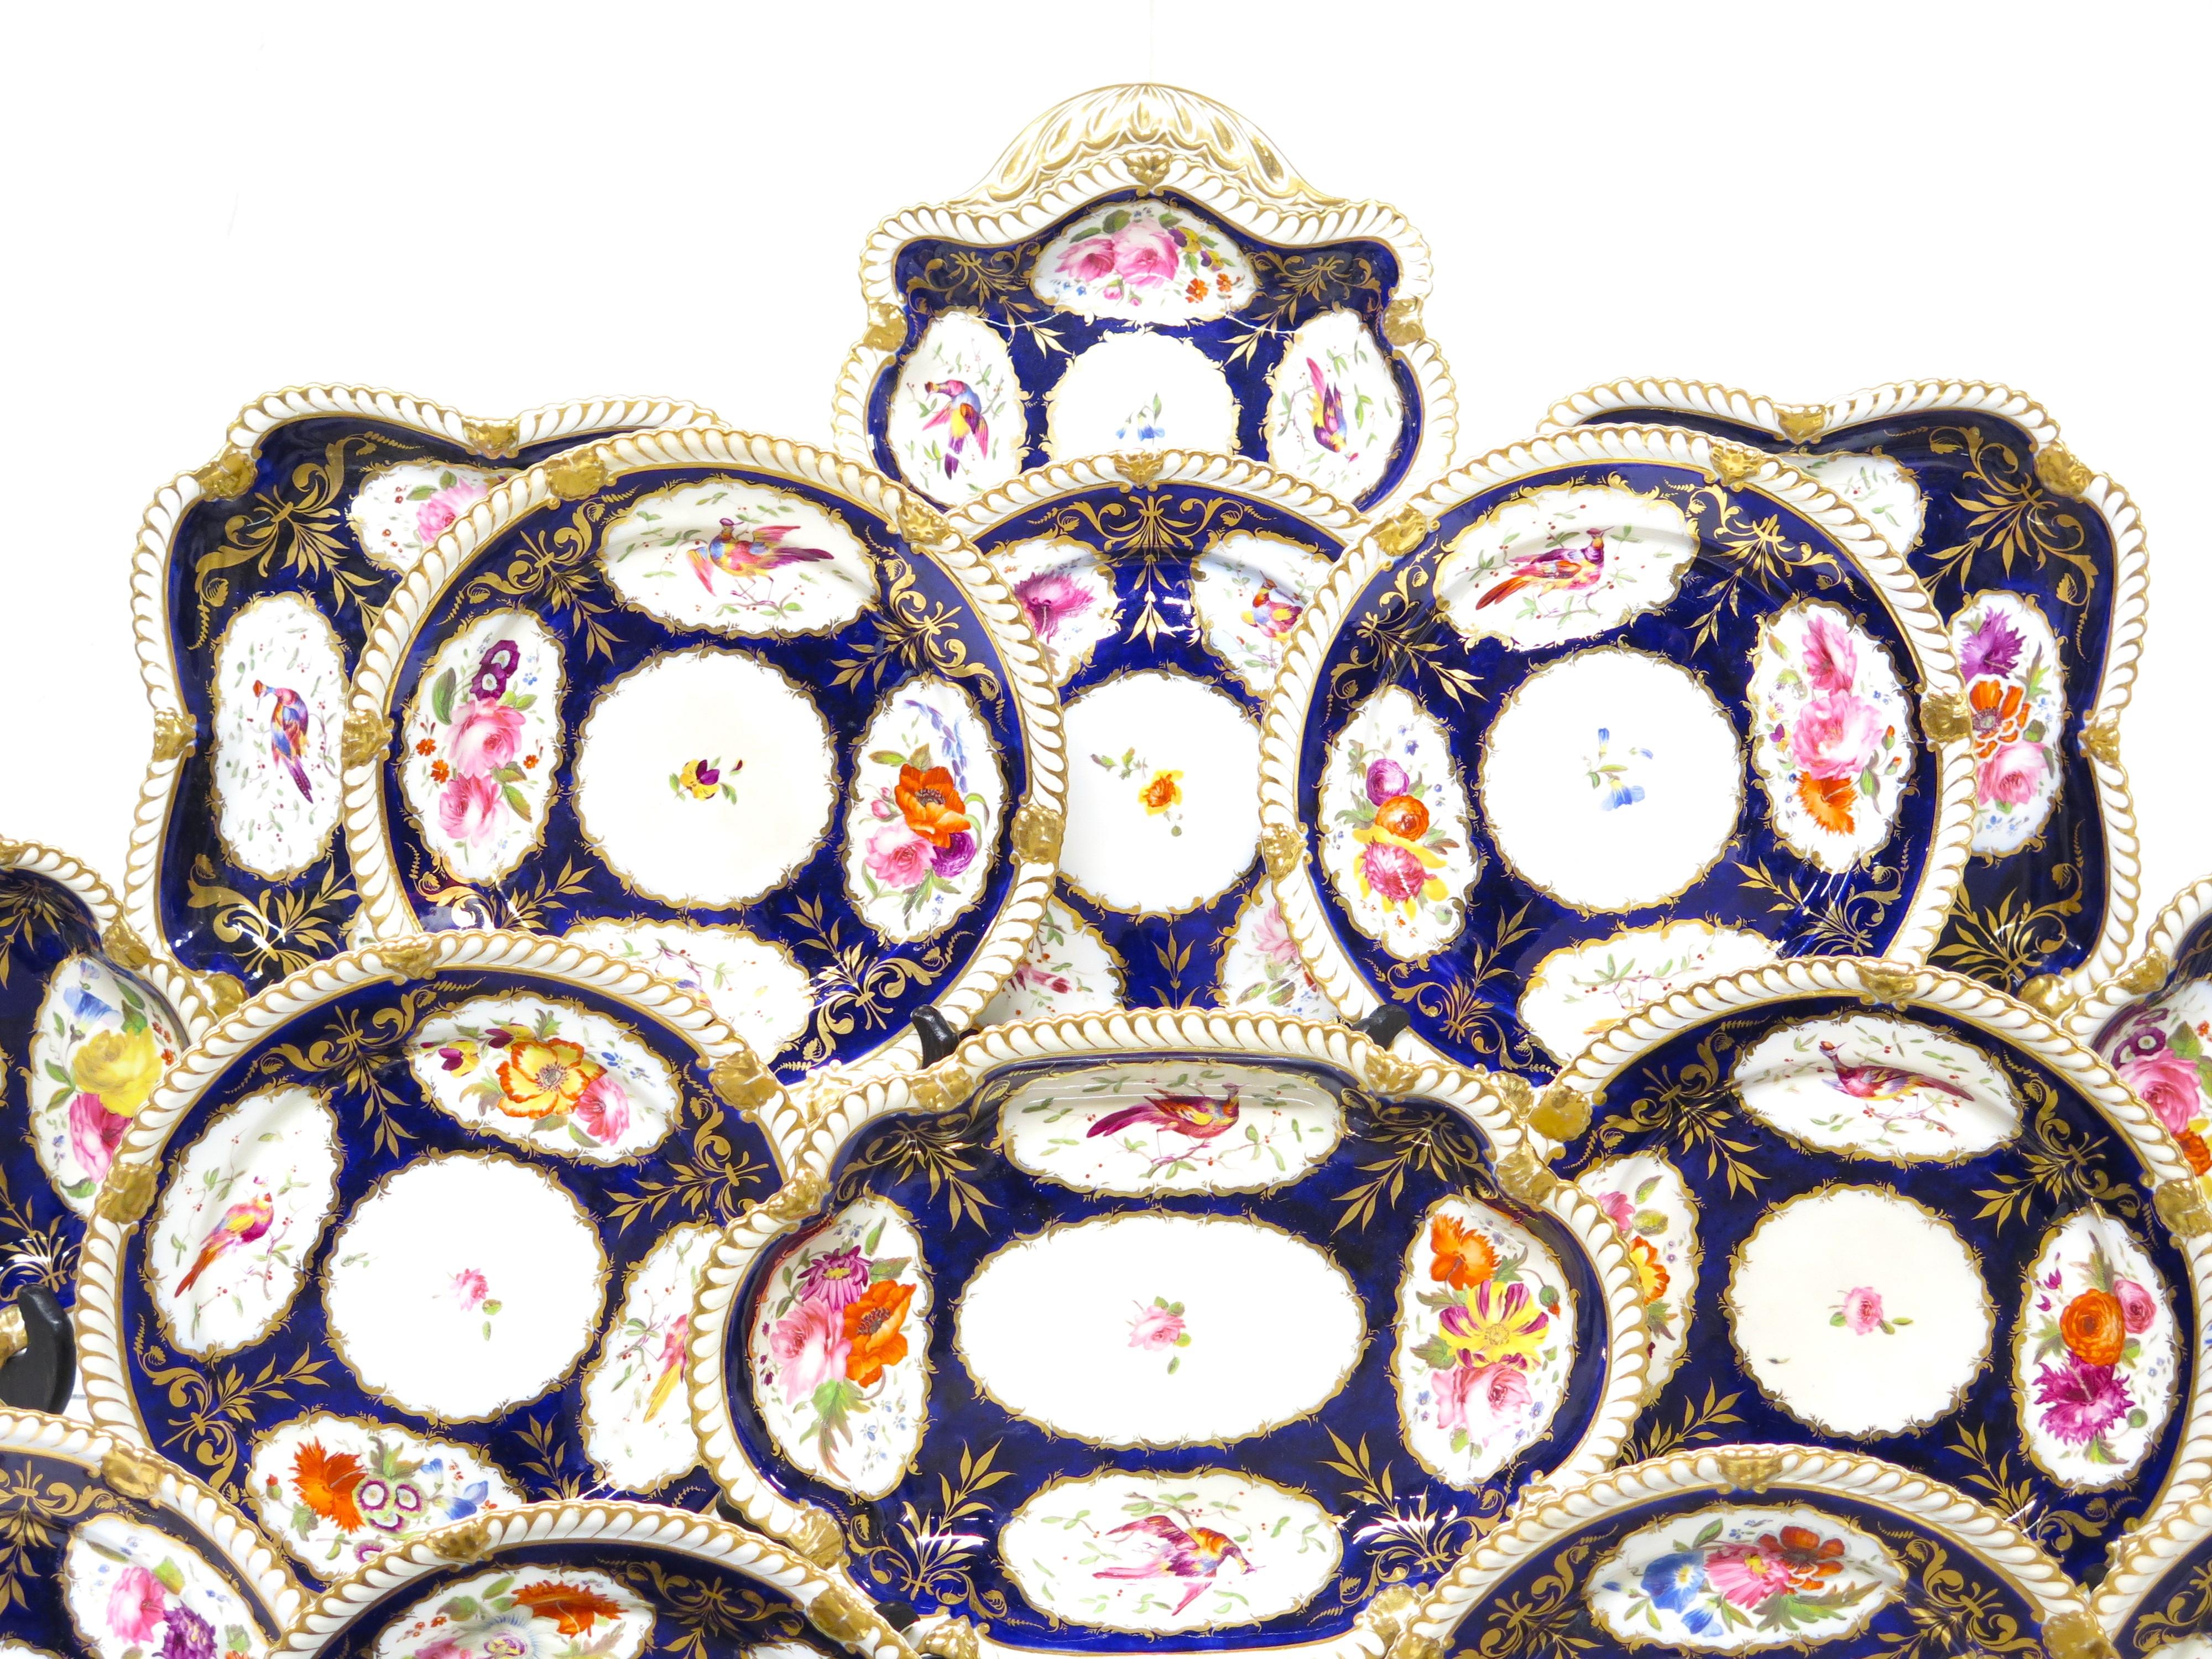 a 26 piece group of Royal Crown Derby-style cobalt, gilt and floral foliate shaped assorted dinner ware / China,  not marked. England, circa 1835

MEASUREMENTS:

17 Plates 8.5